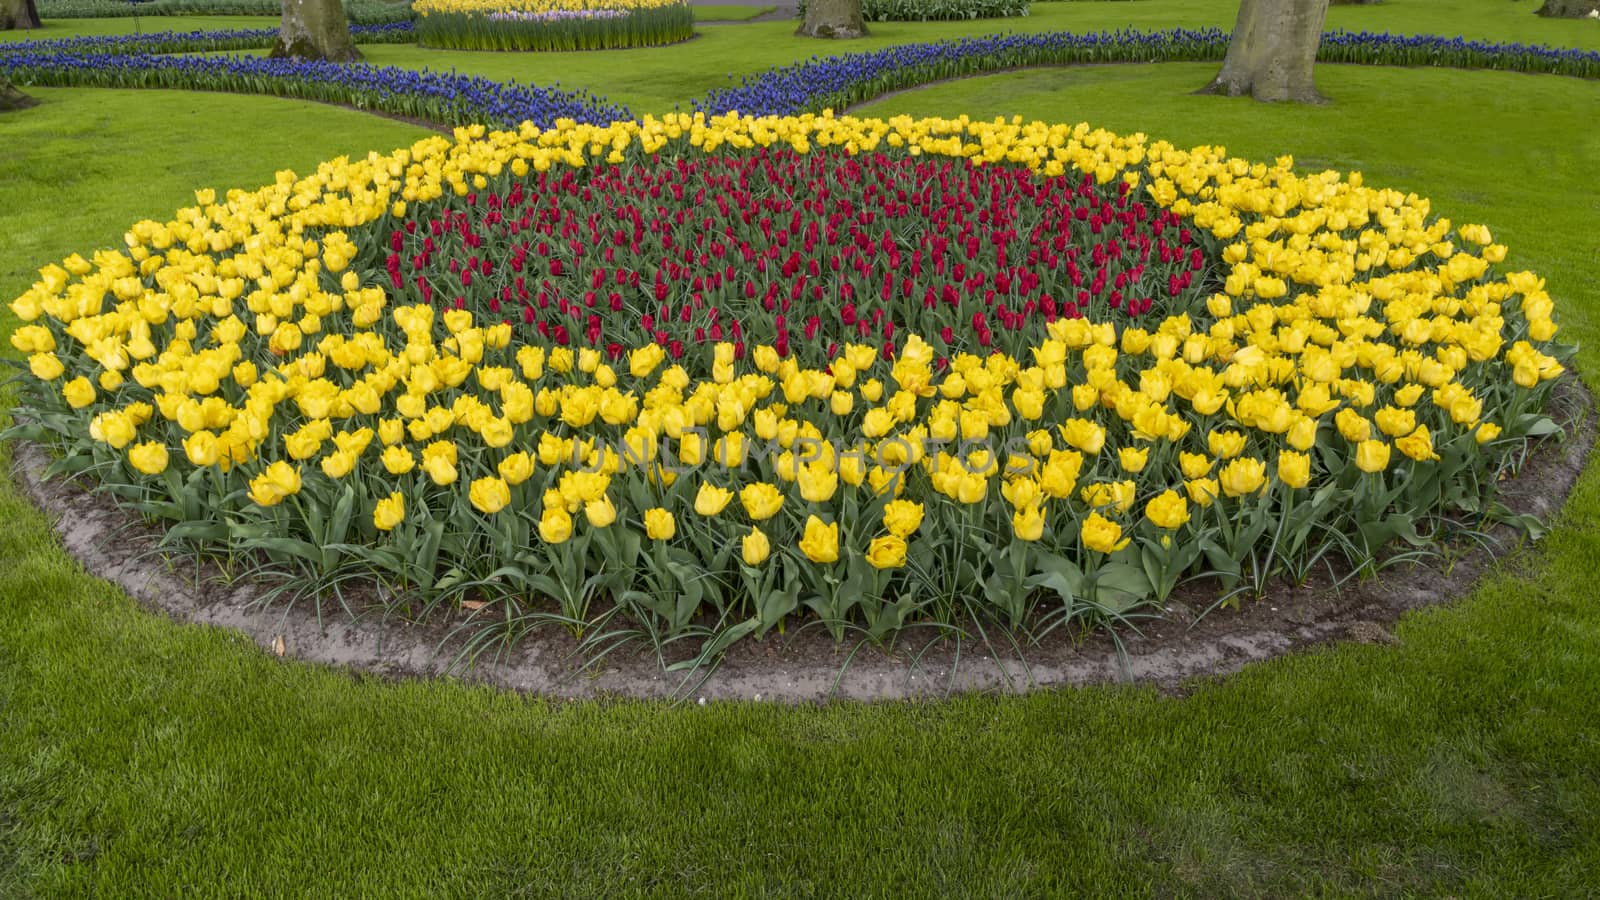 Circular bouquet shape of tulips blossom growing under a bright spring sun light in a well maintained garden